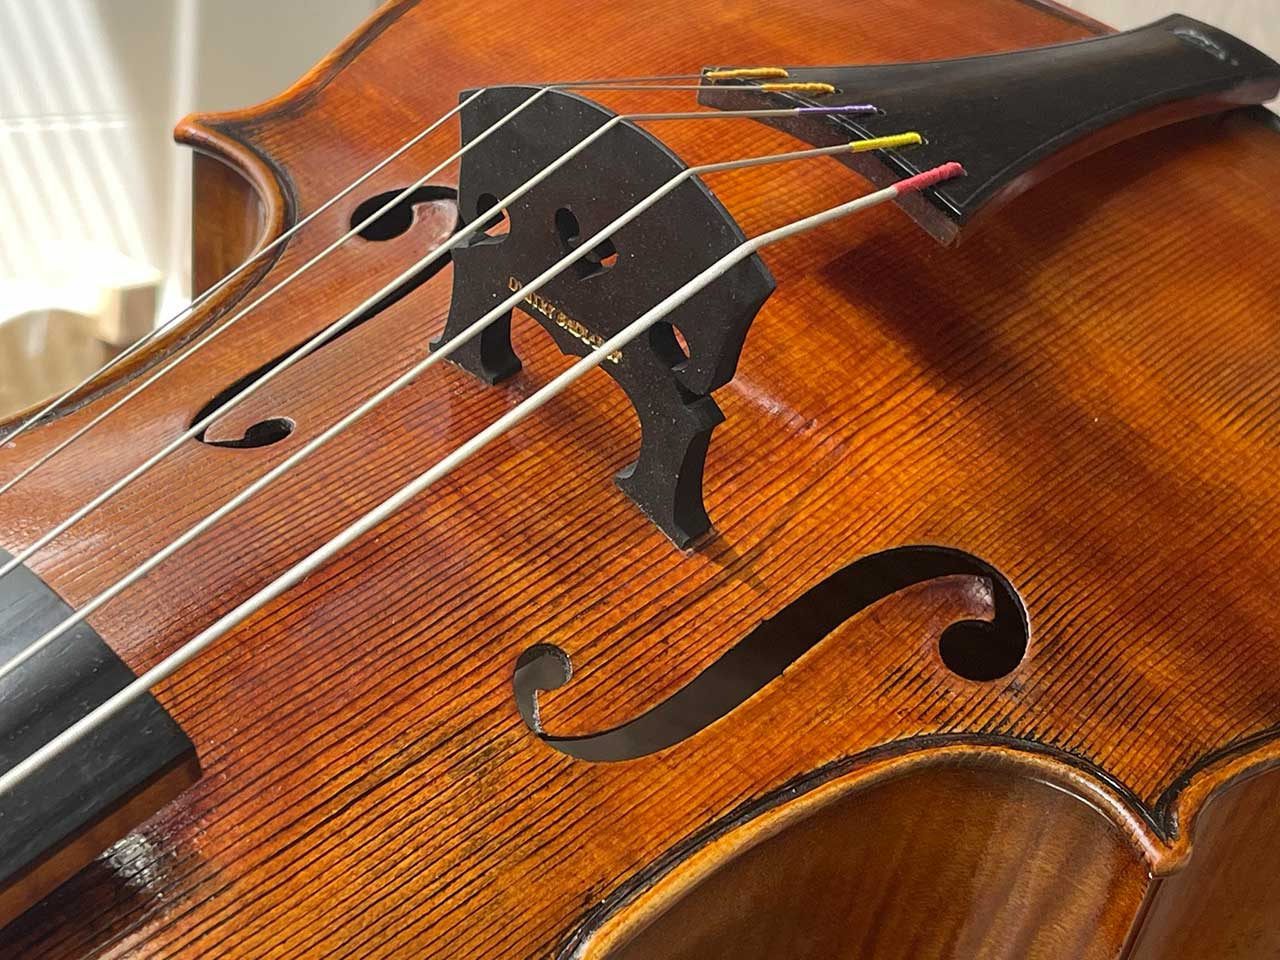 Mastering the Art of Violin Making: A Look into Dmitry Badiarov's Book - Luthiers.com